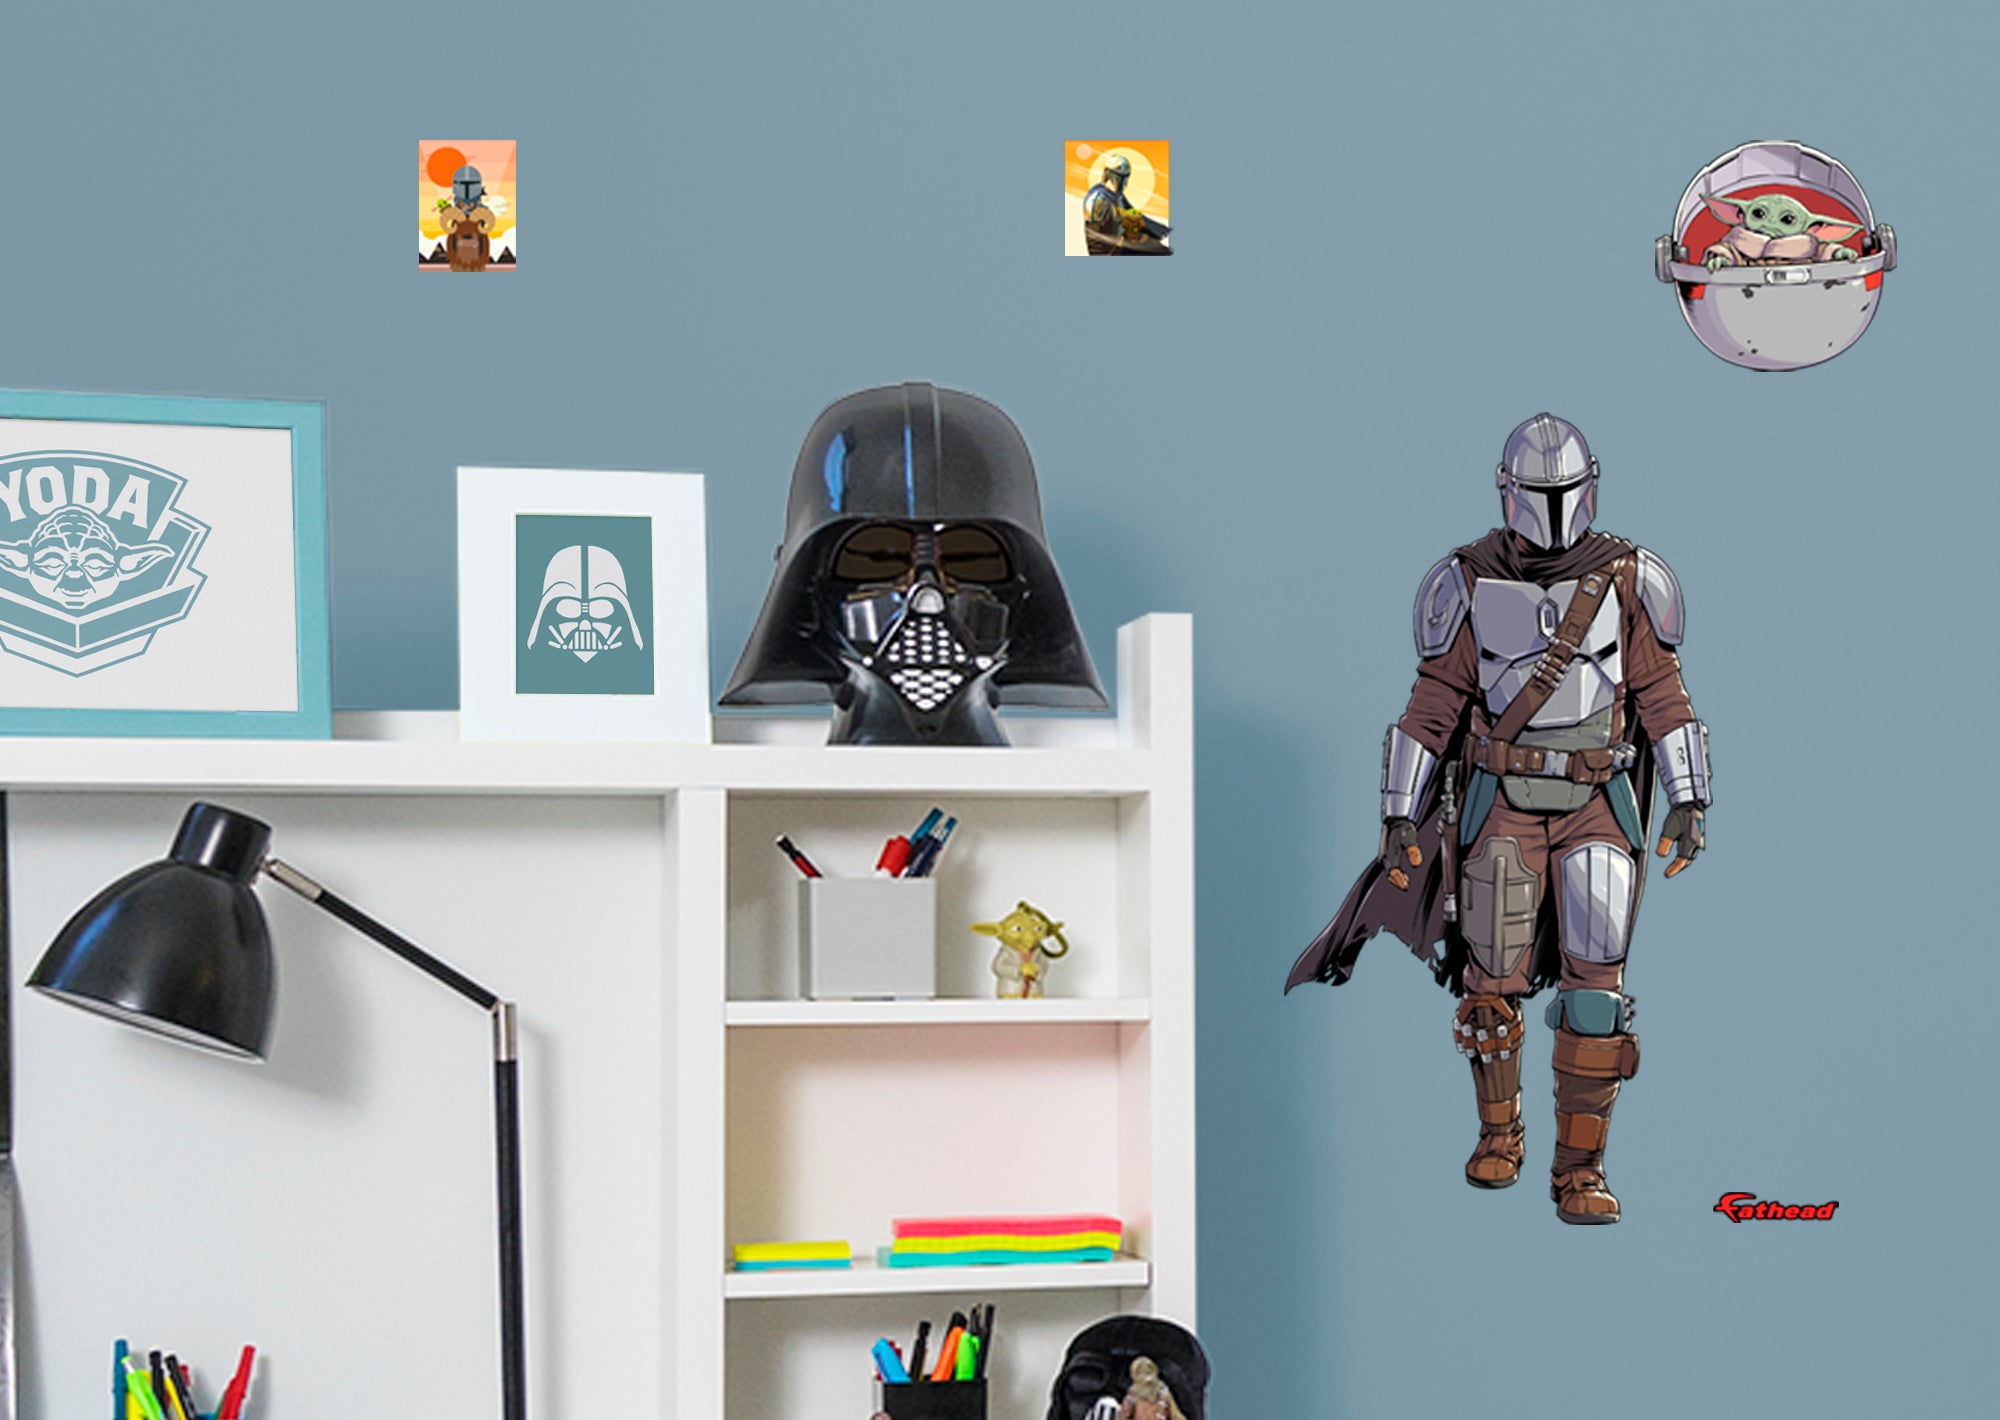 The Mandalorian with Child - Officially Licensed Star Wars Removable Wall Decal Large by Fathead | Vinyl